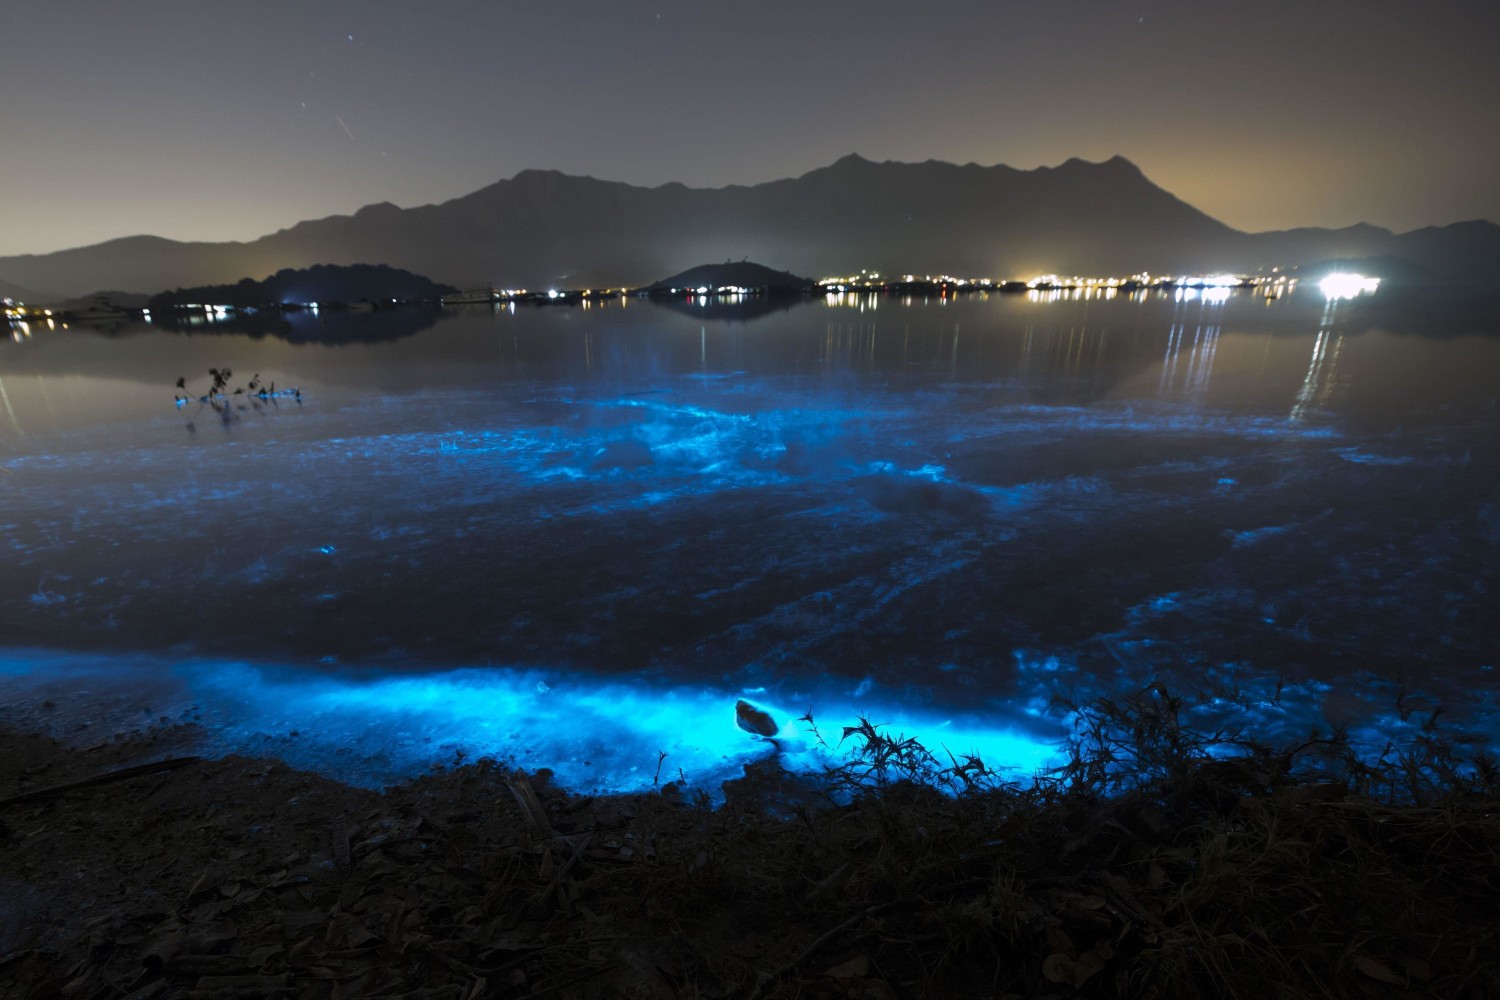 Bioluminescence is most abundant in the open ocean environment where